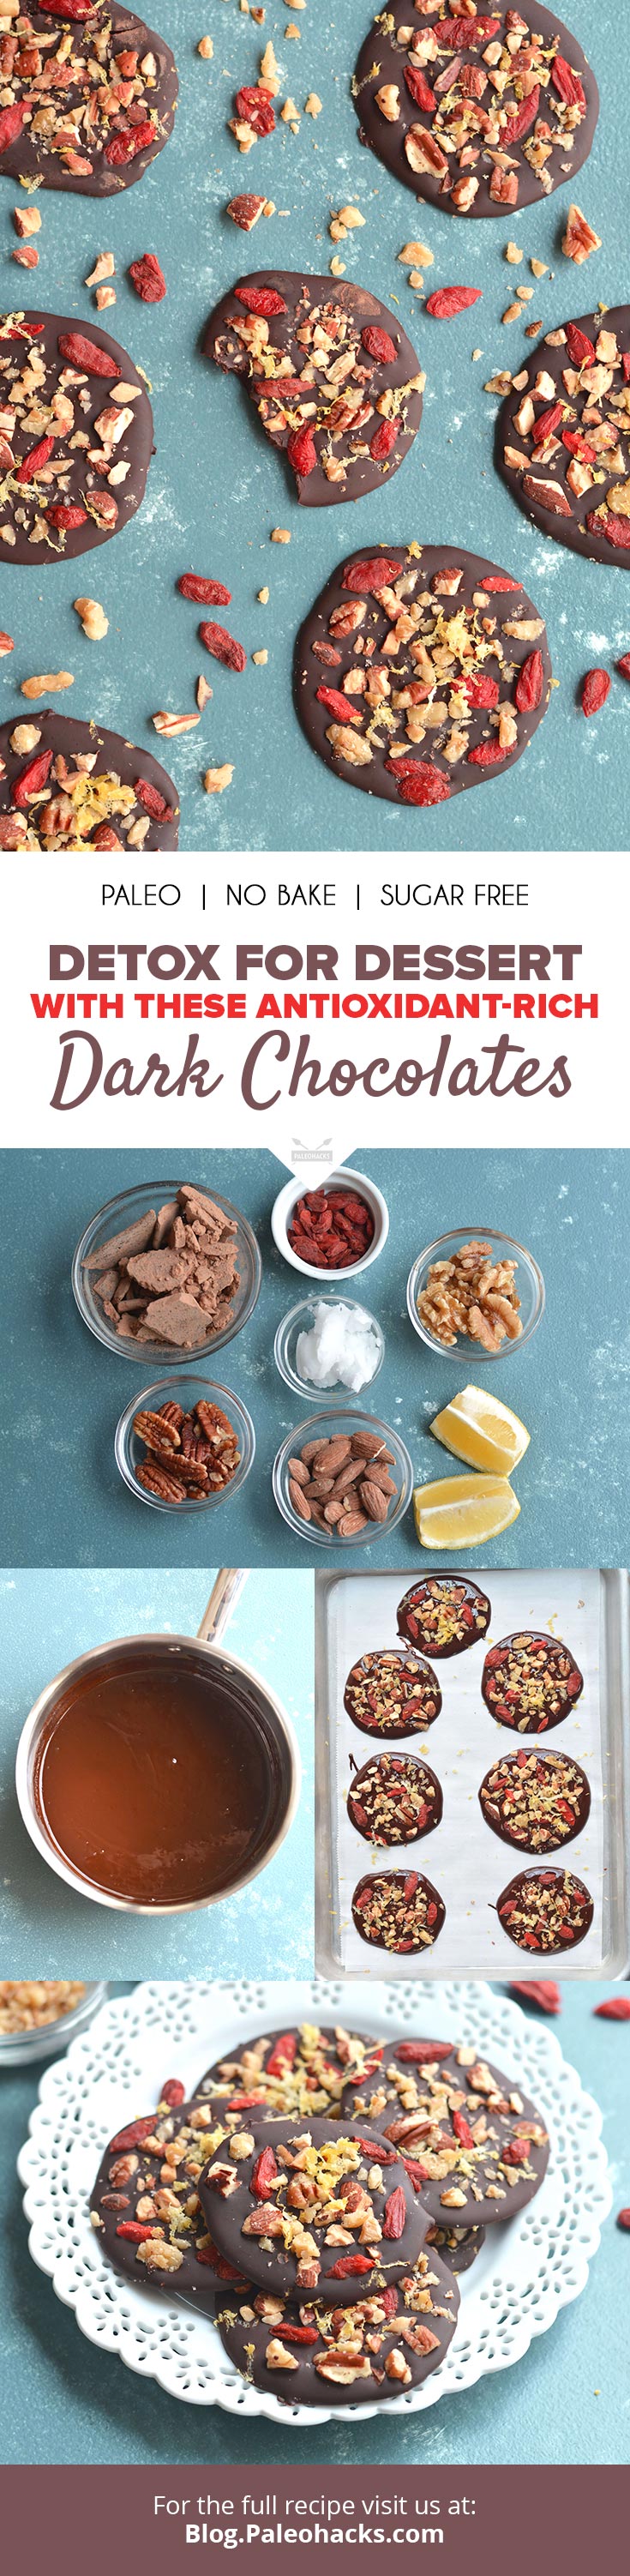 Detox for dessert with these antioxidant-rich dark chocolates. Boost your immune system with dark chocolate cookies.